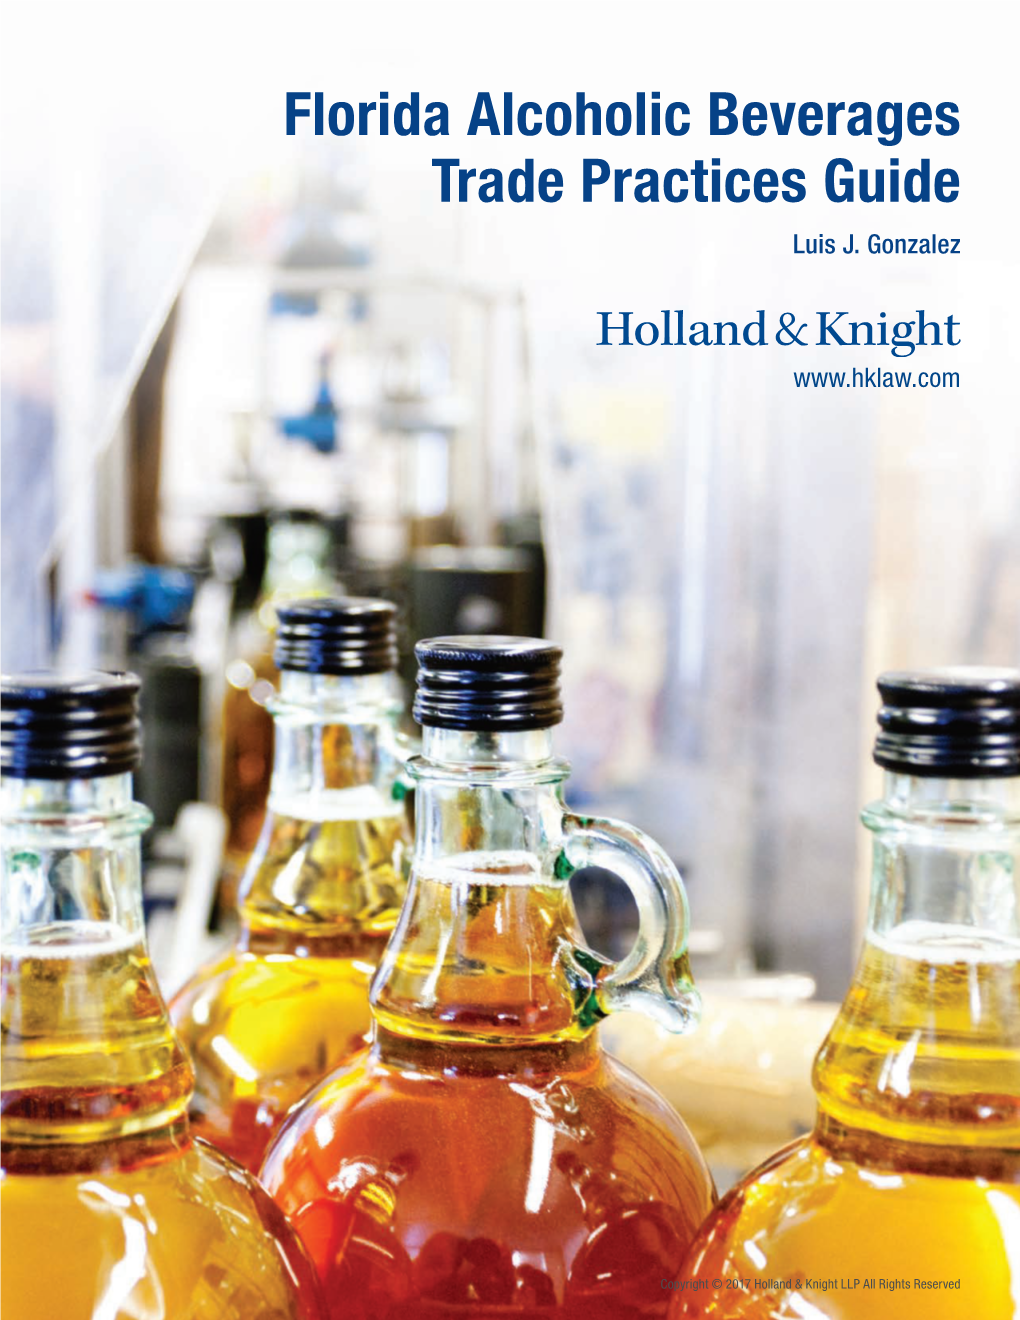 Florida Alcoholic Beverages Trade Practices Guide Luis J